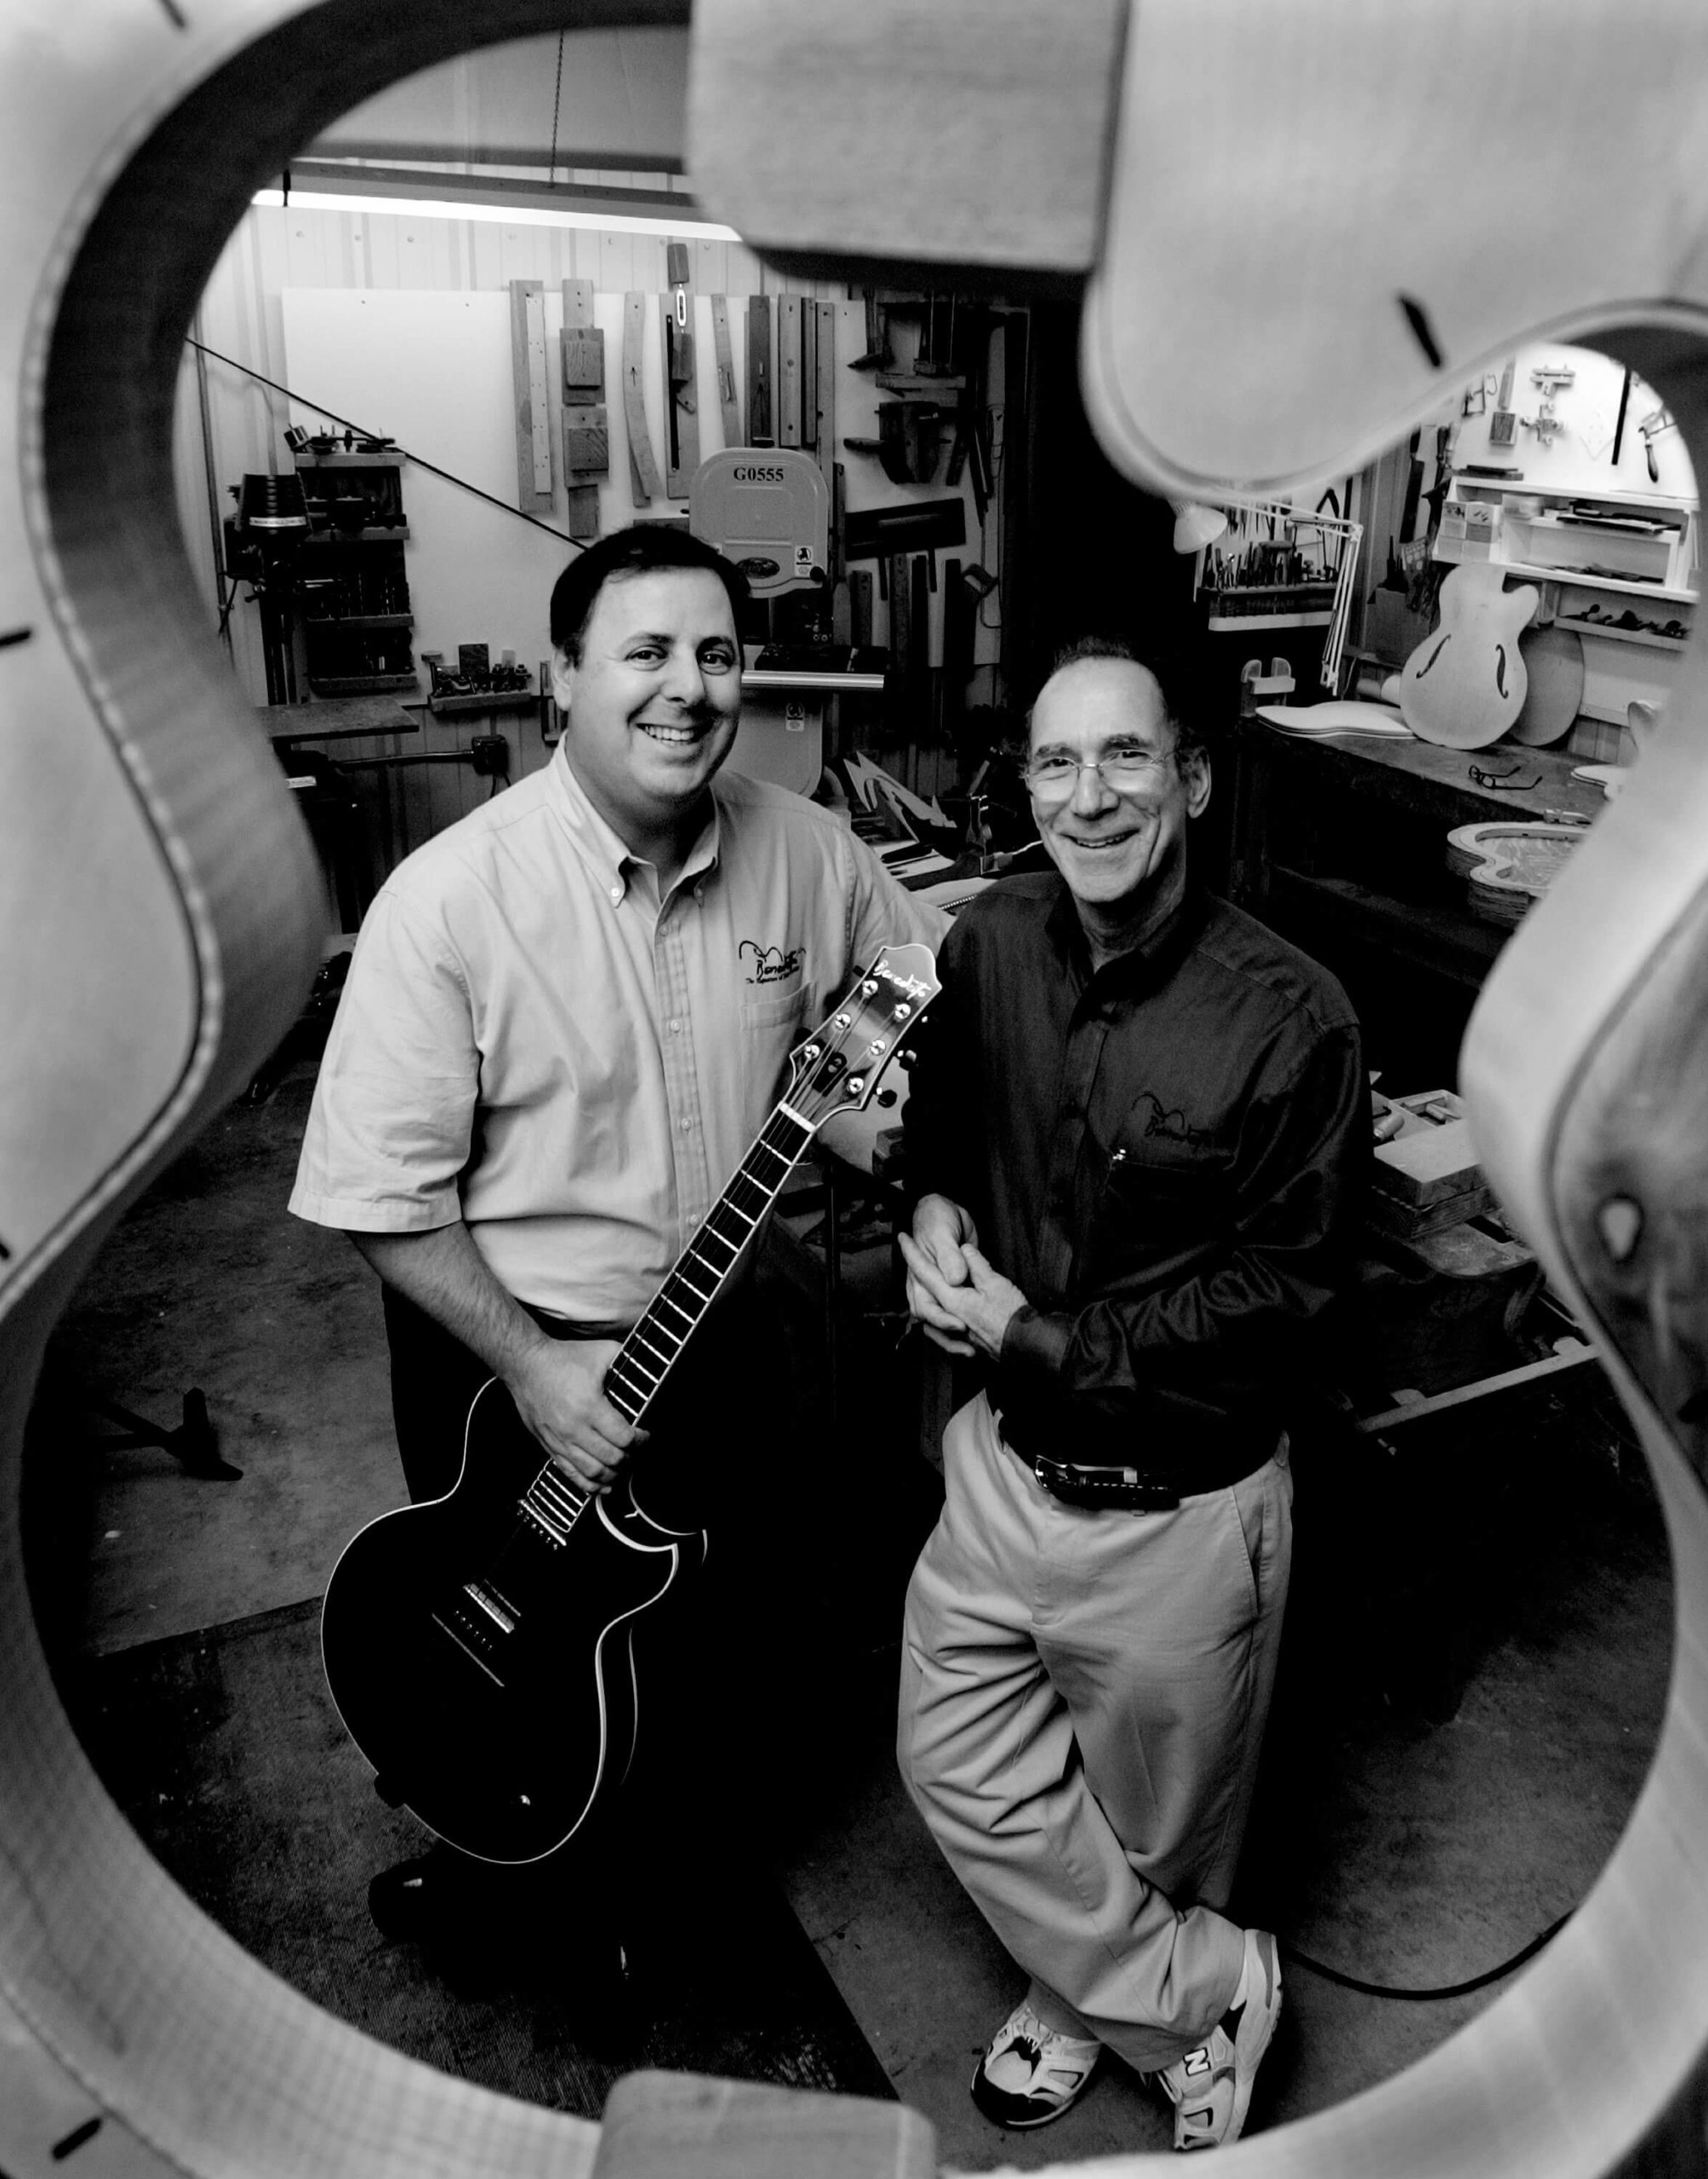 Howard Paul and Bob Benedetto in shop shot through a guitar shape in black and white